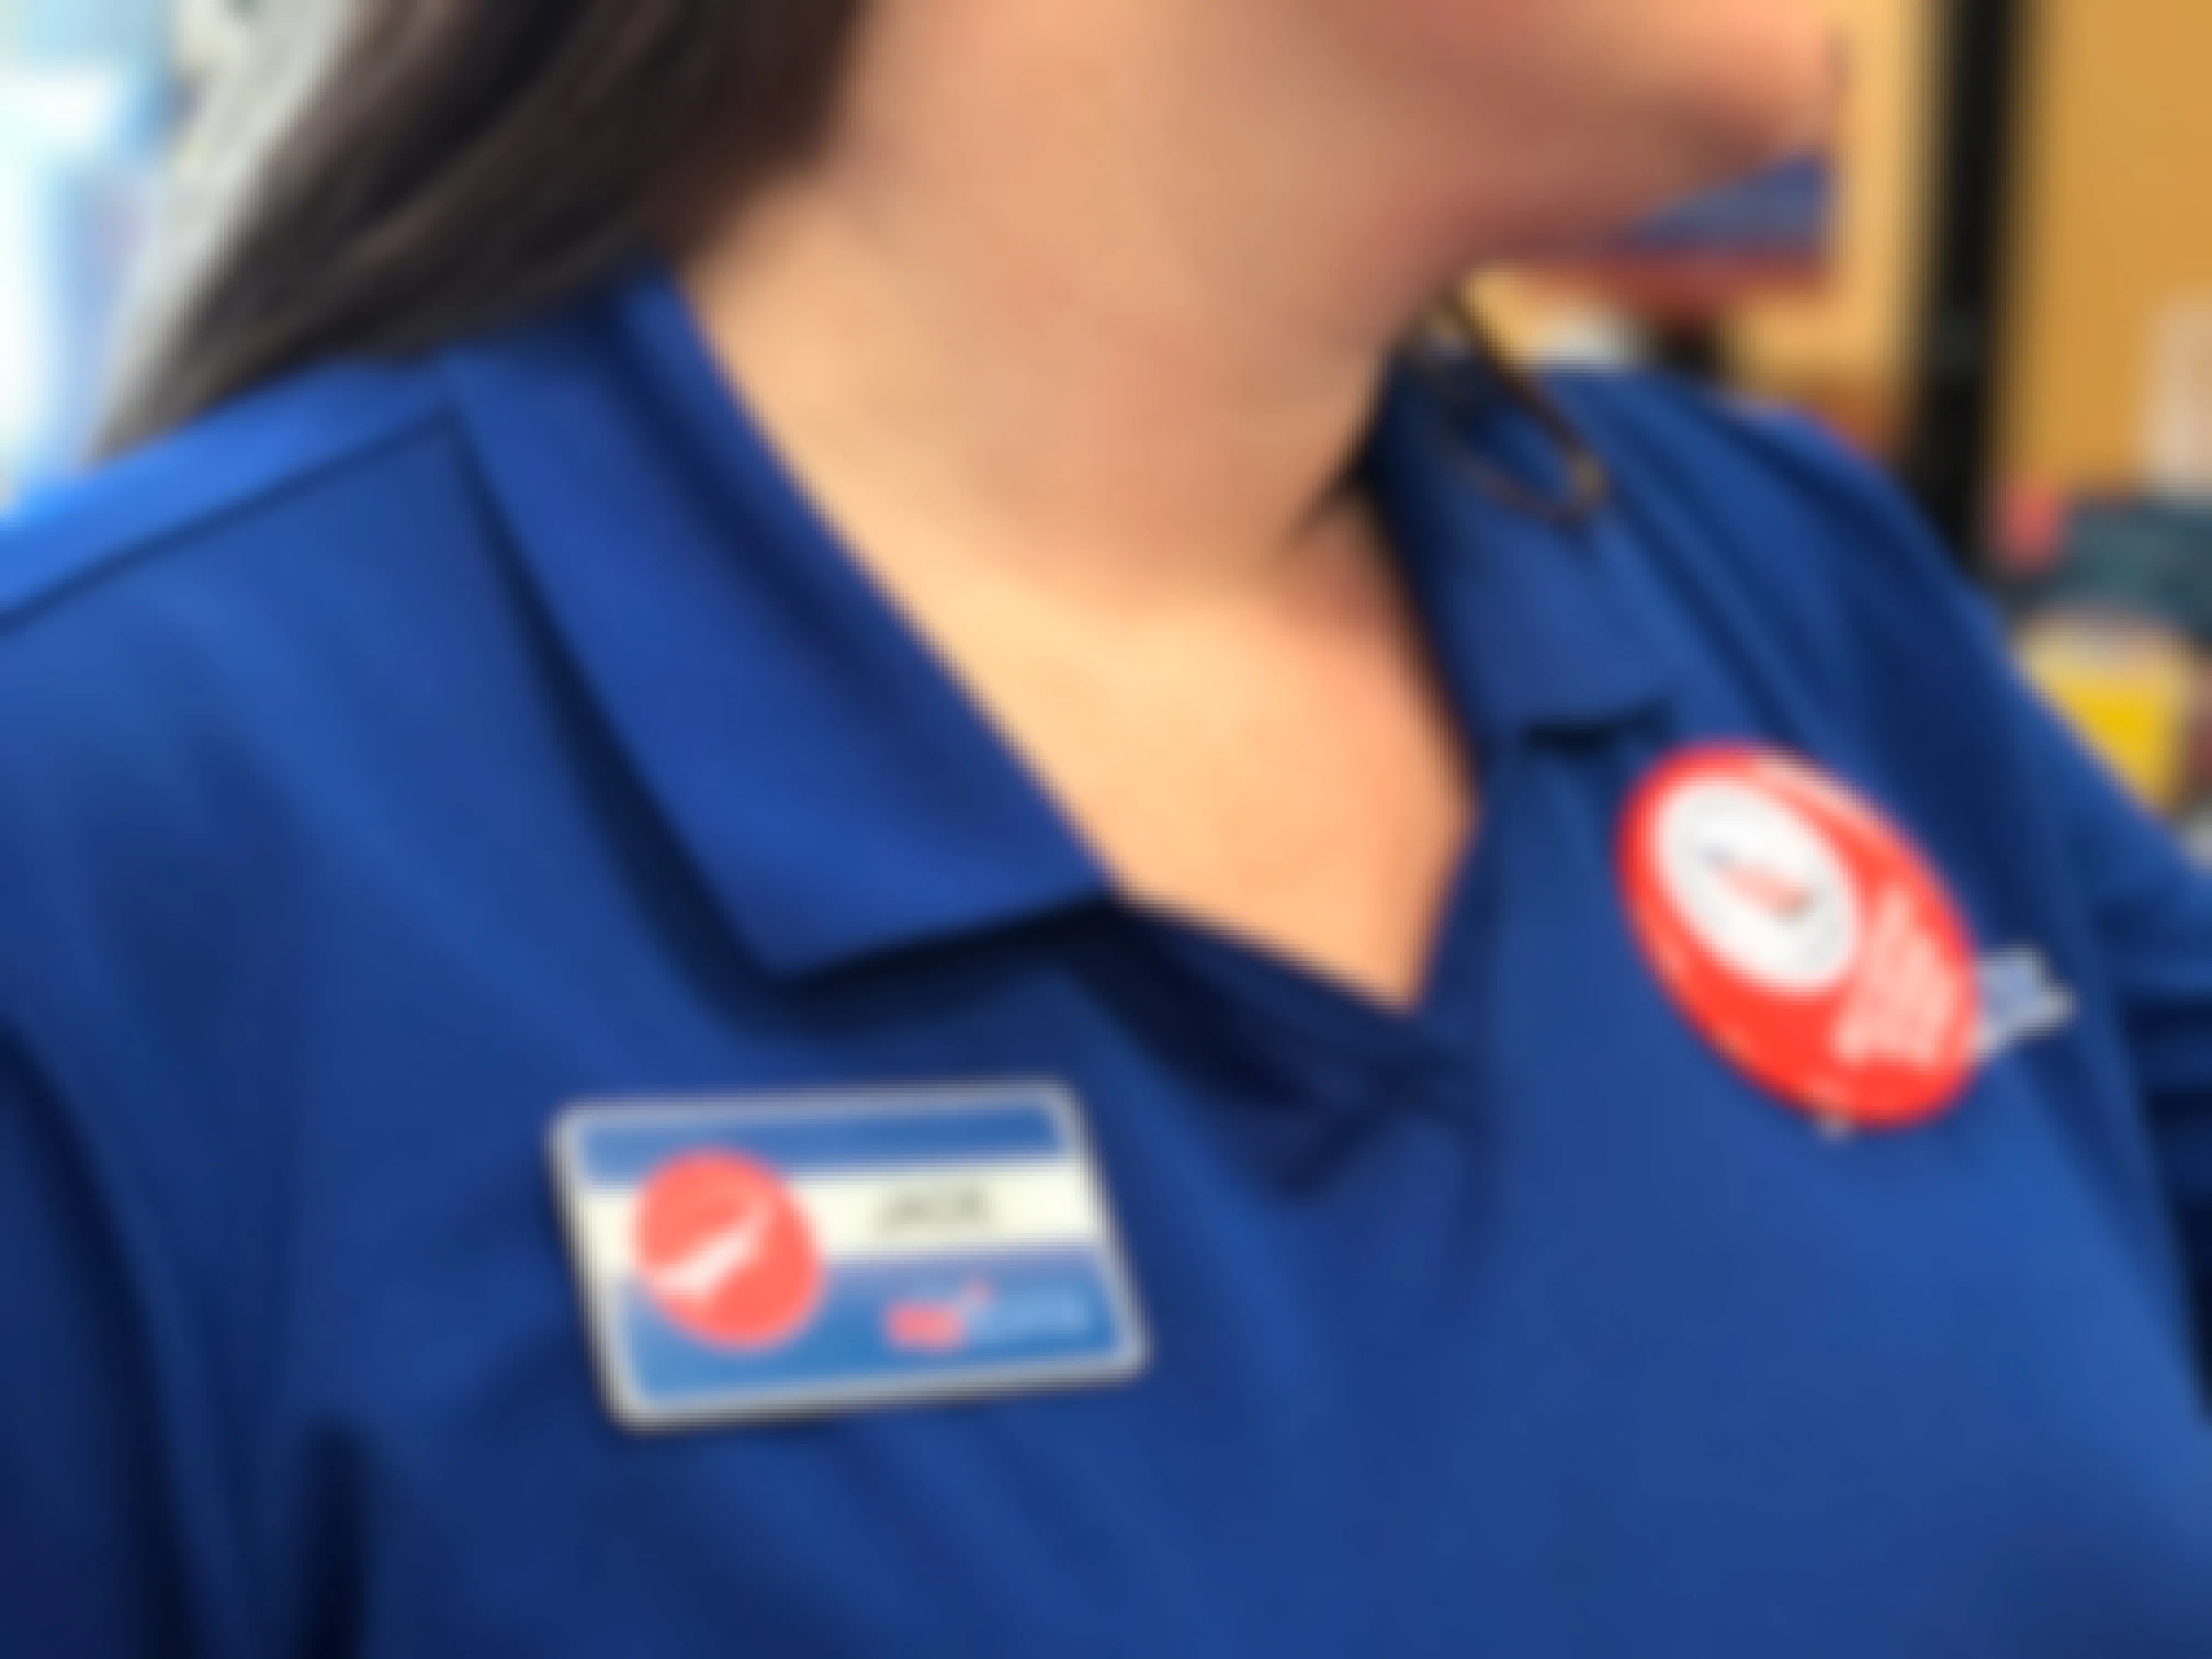 A close-up of a PetSmart employee, showing her name tag that reads, "Jade".